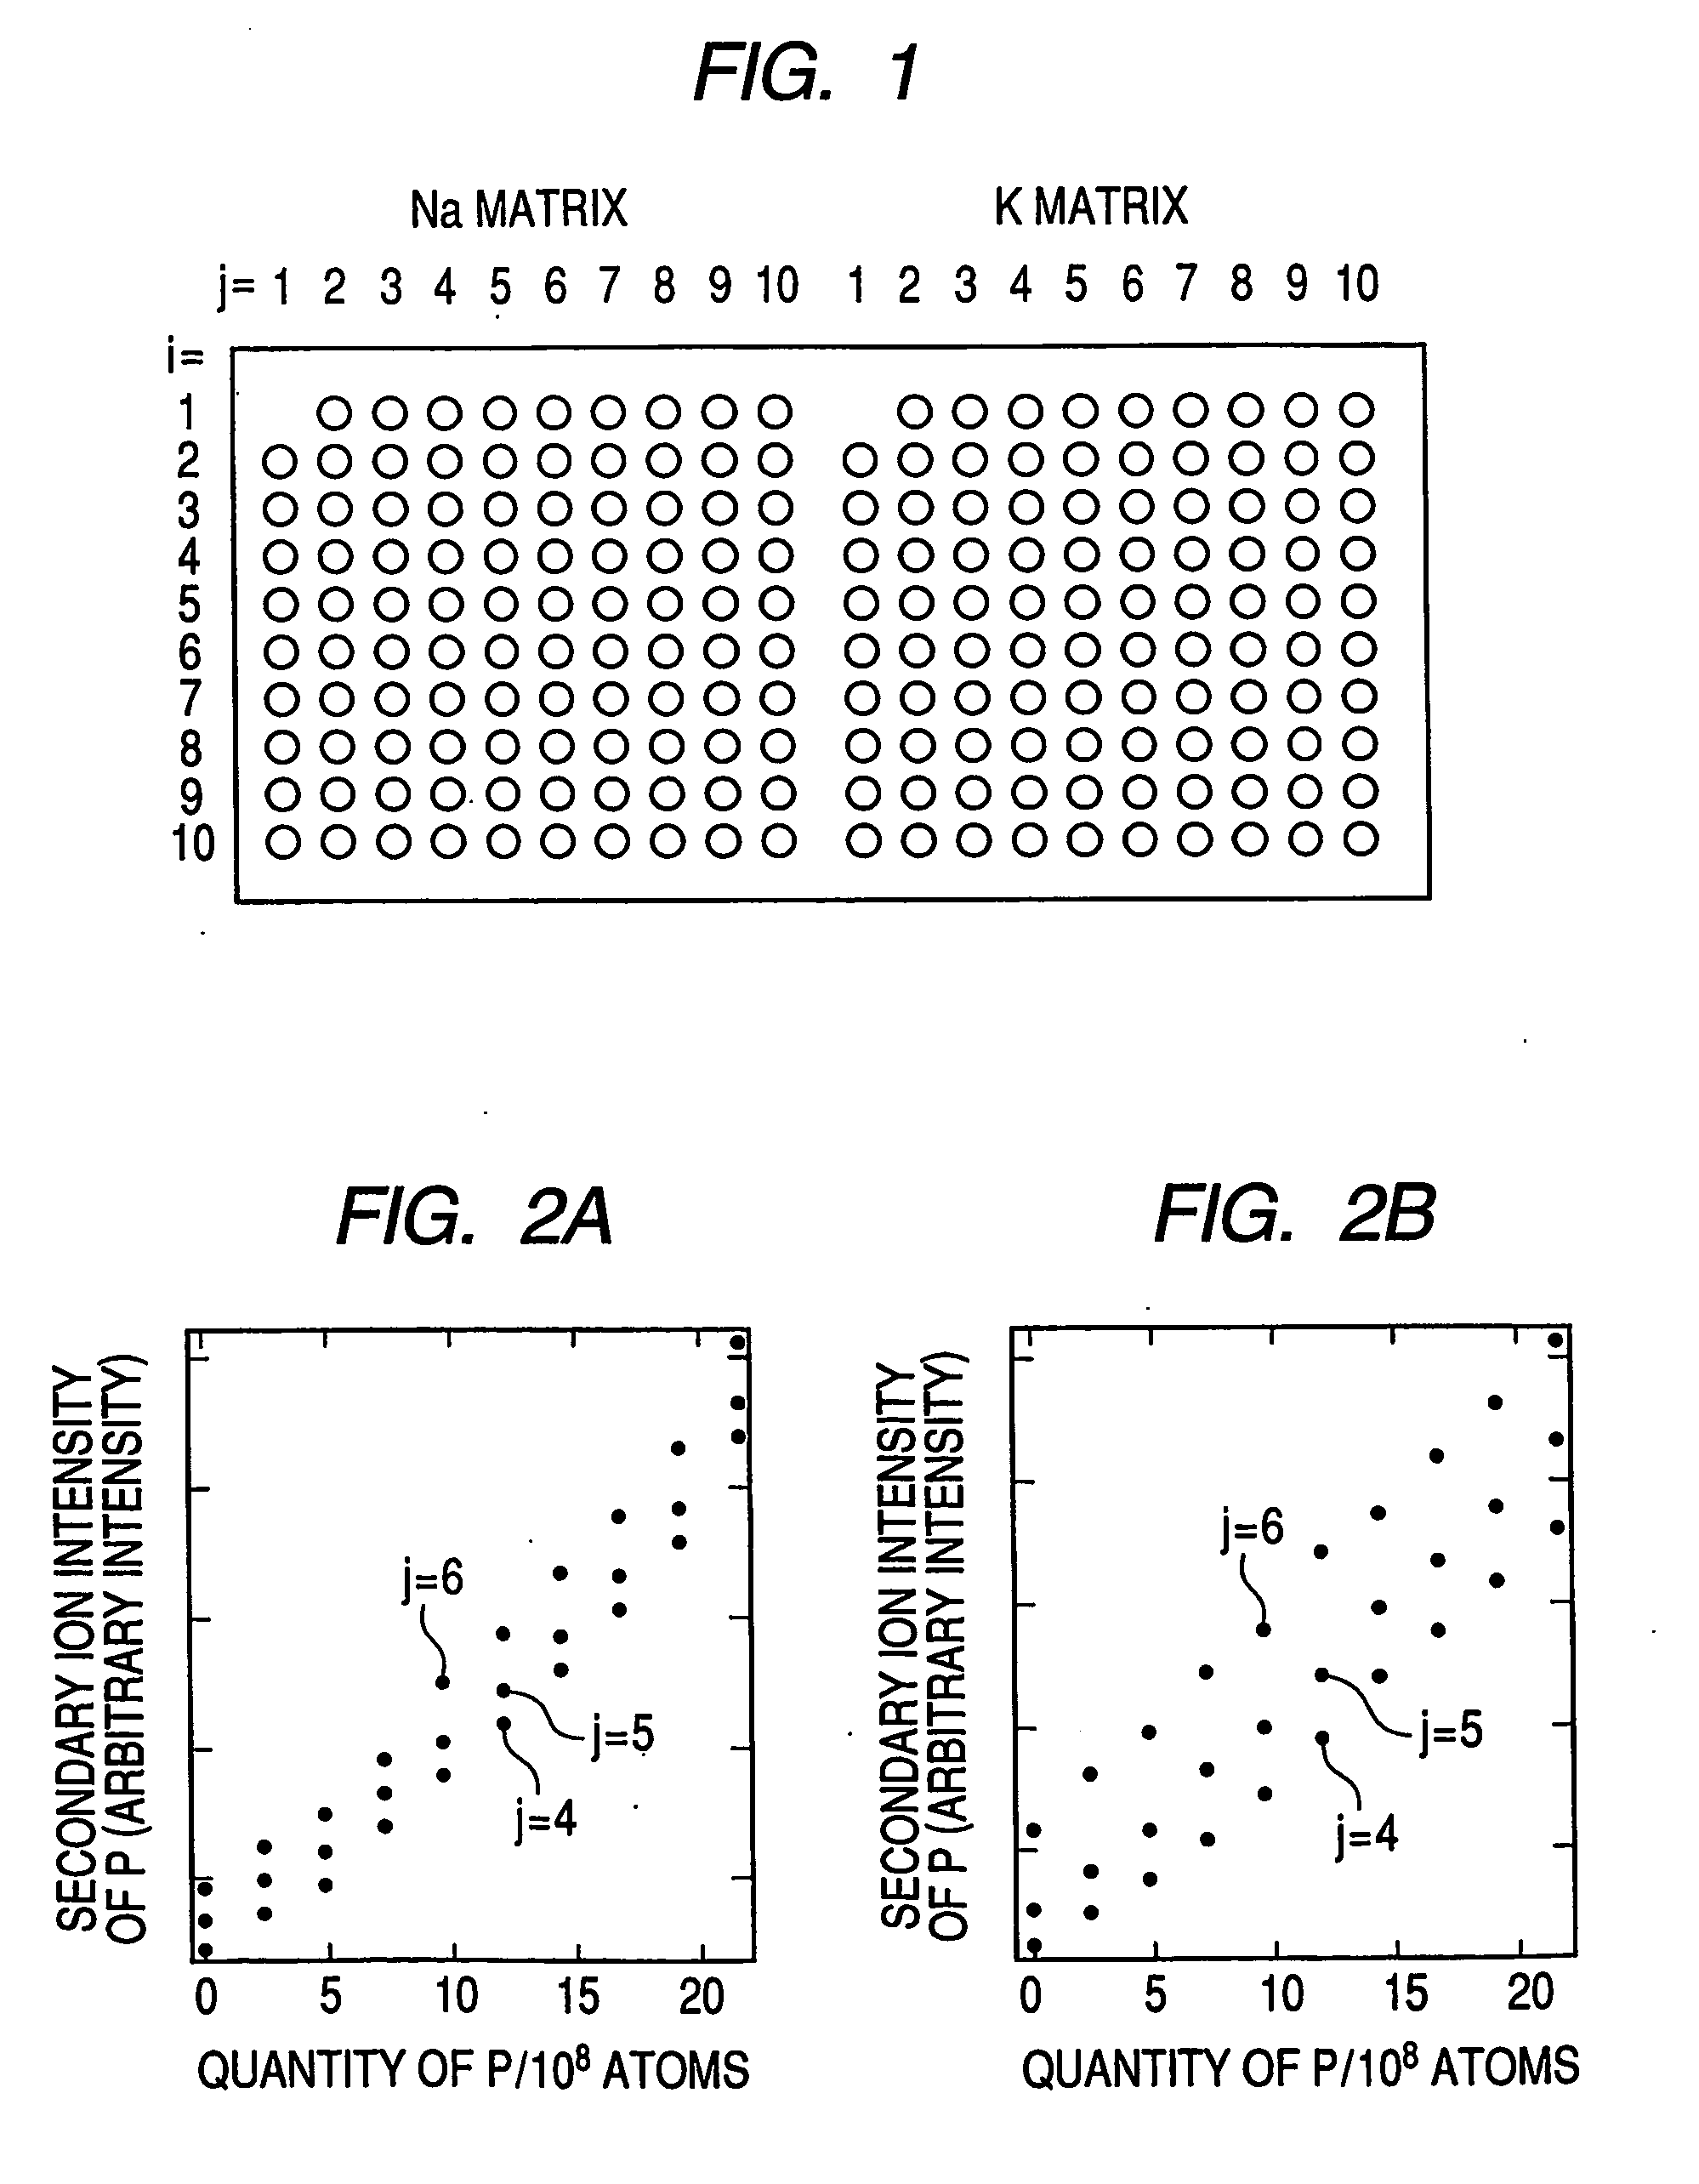 Test specimen and production thereof